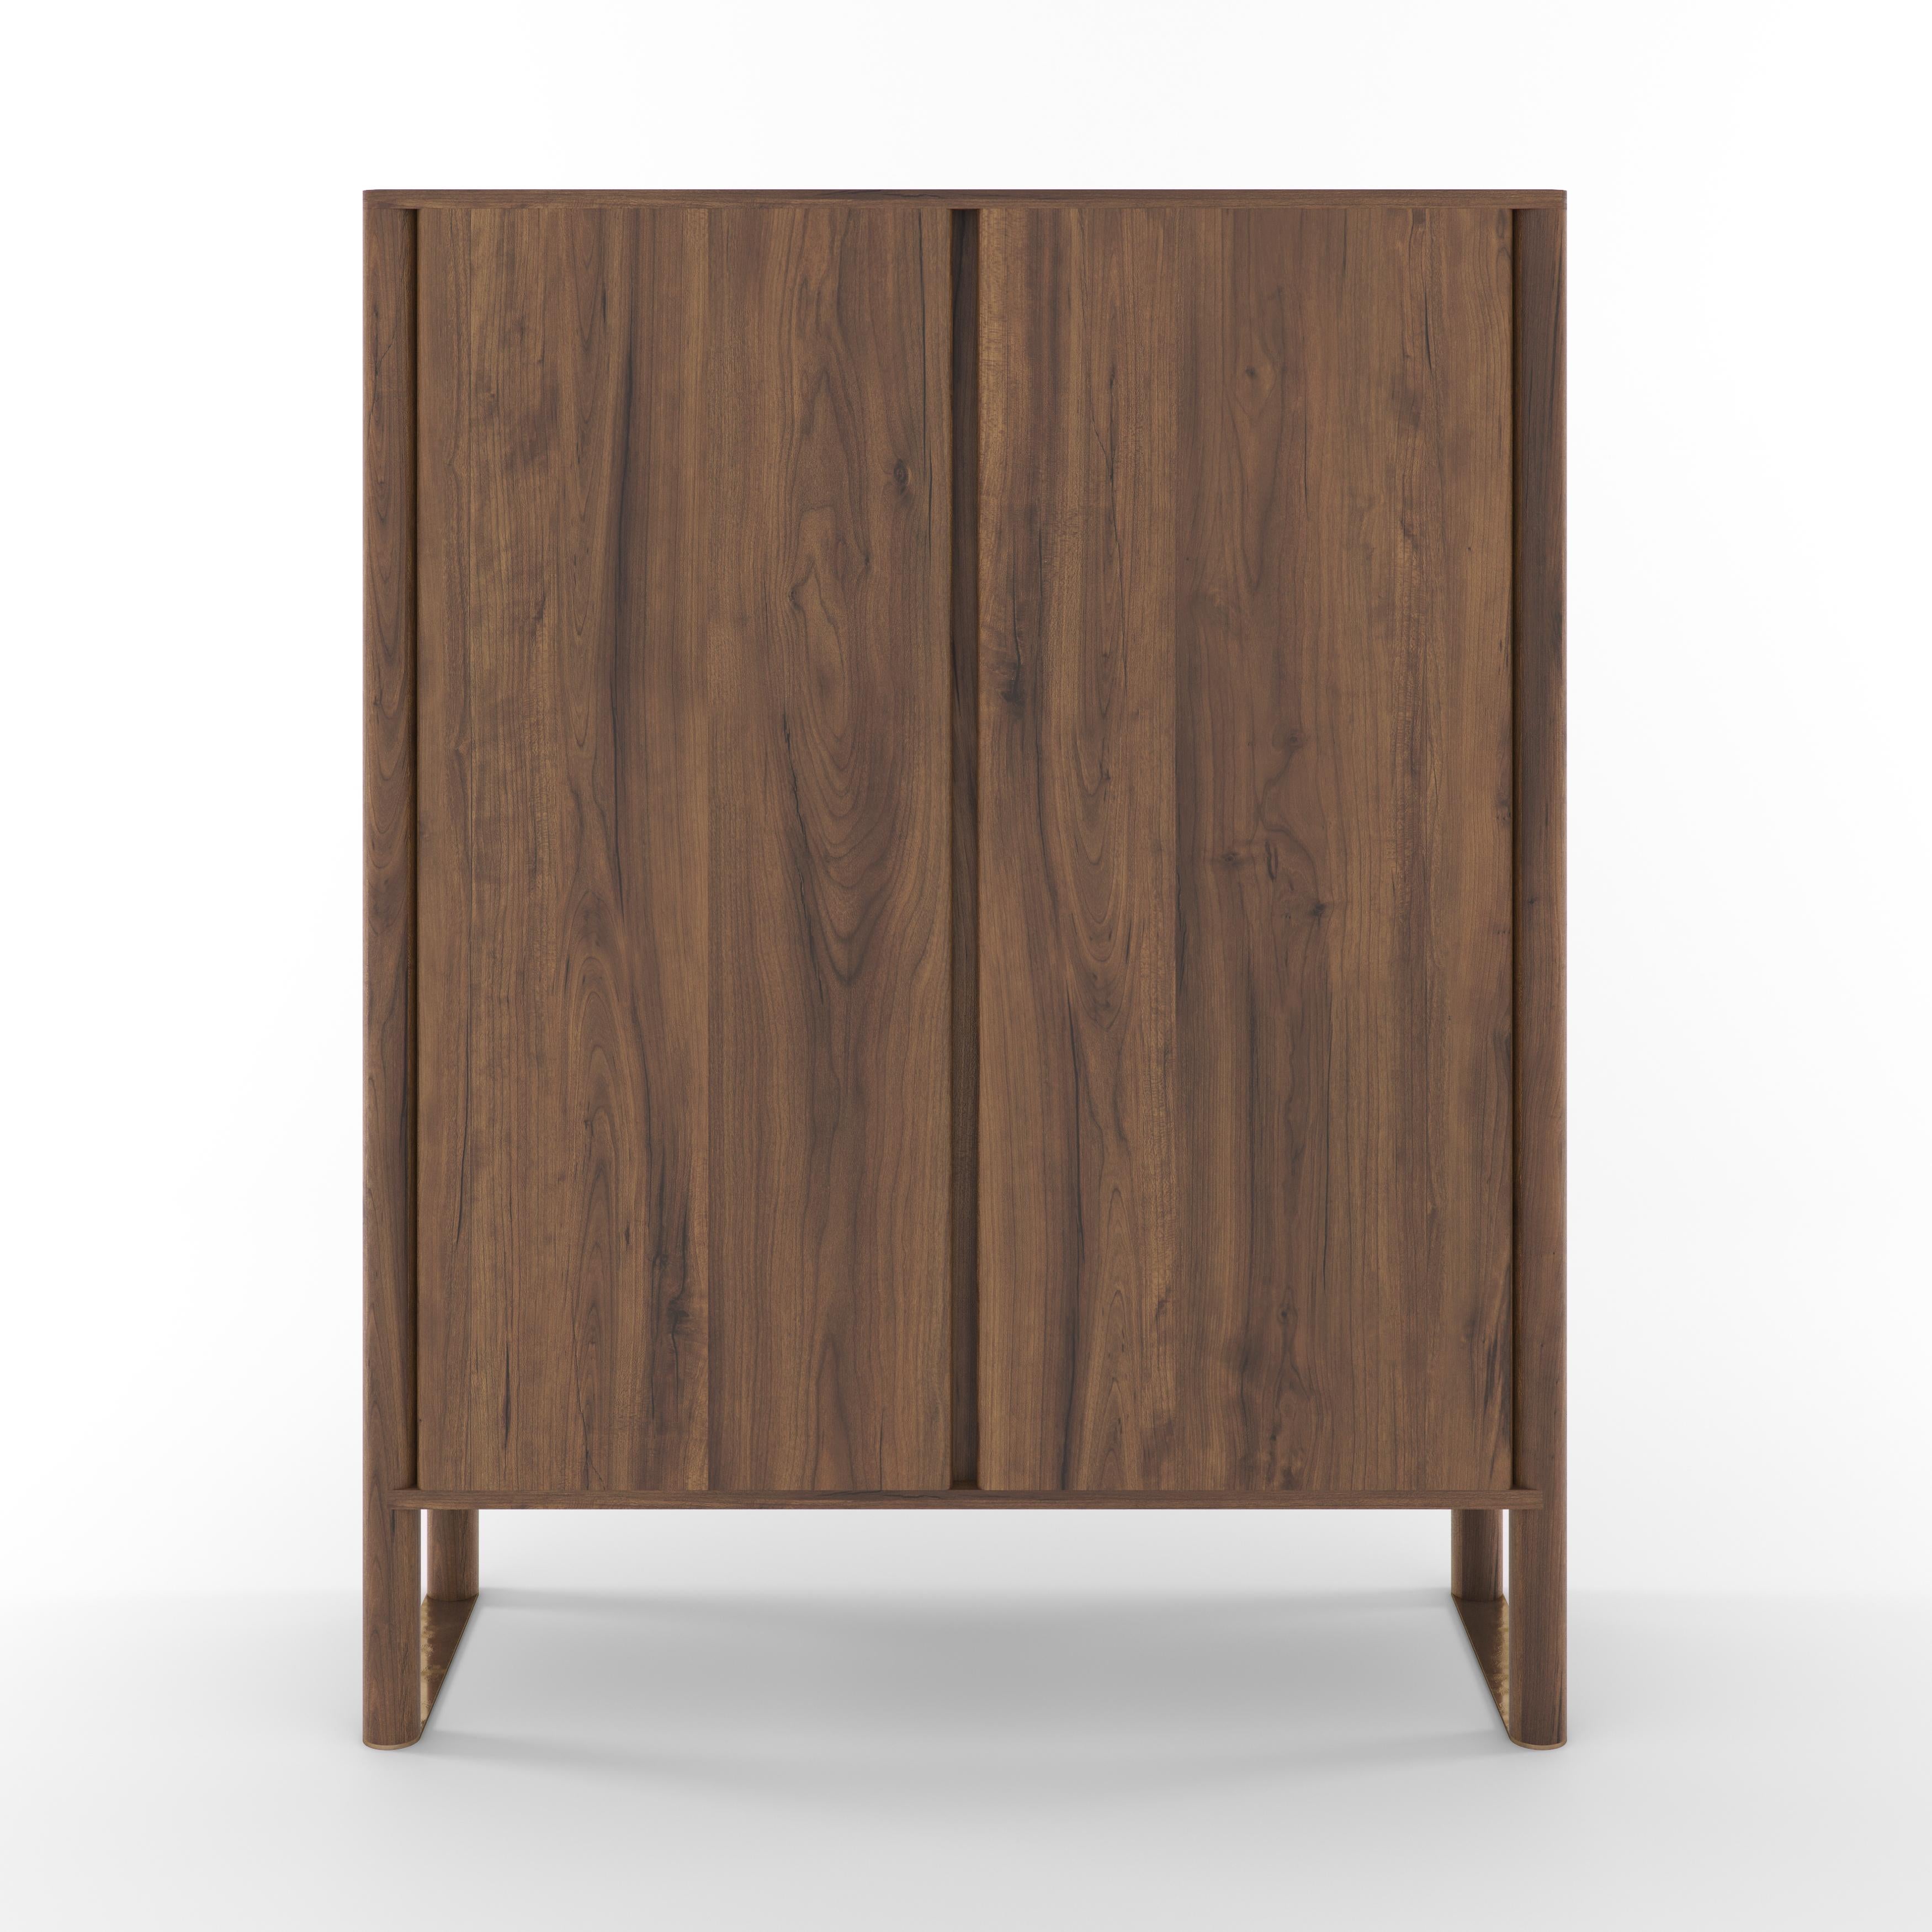 Oscar is quiet and confident. A curvaceous monolith that offers flexibility and beauty to your home.

Available in a range of timber options. Made to order and customisation available to suit your requirements (POA).

Lead time is approx 14-16